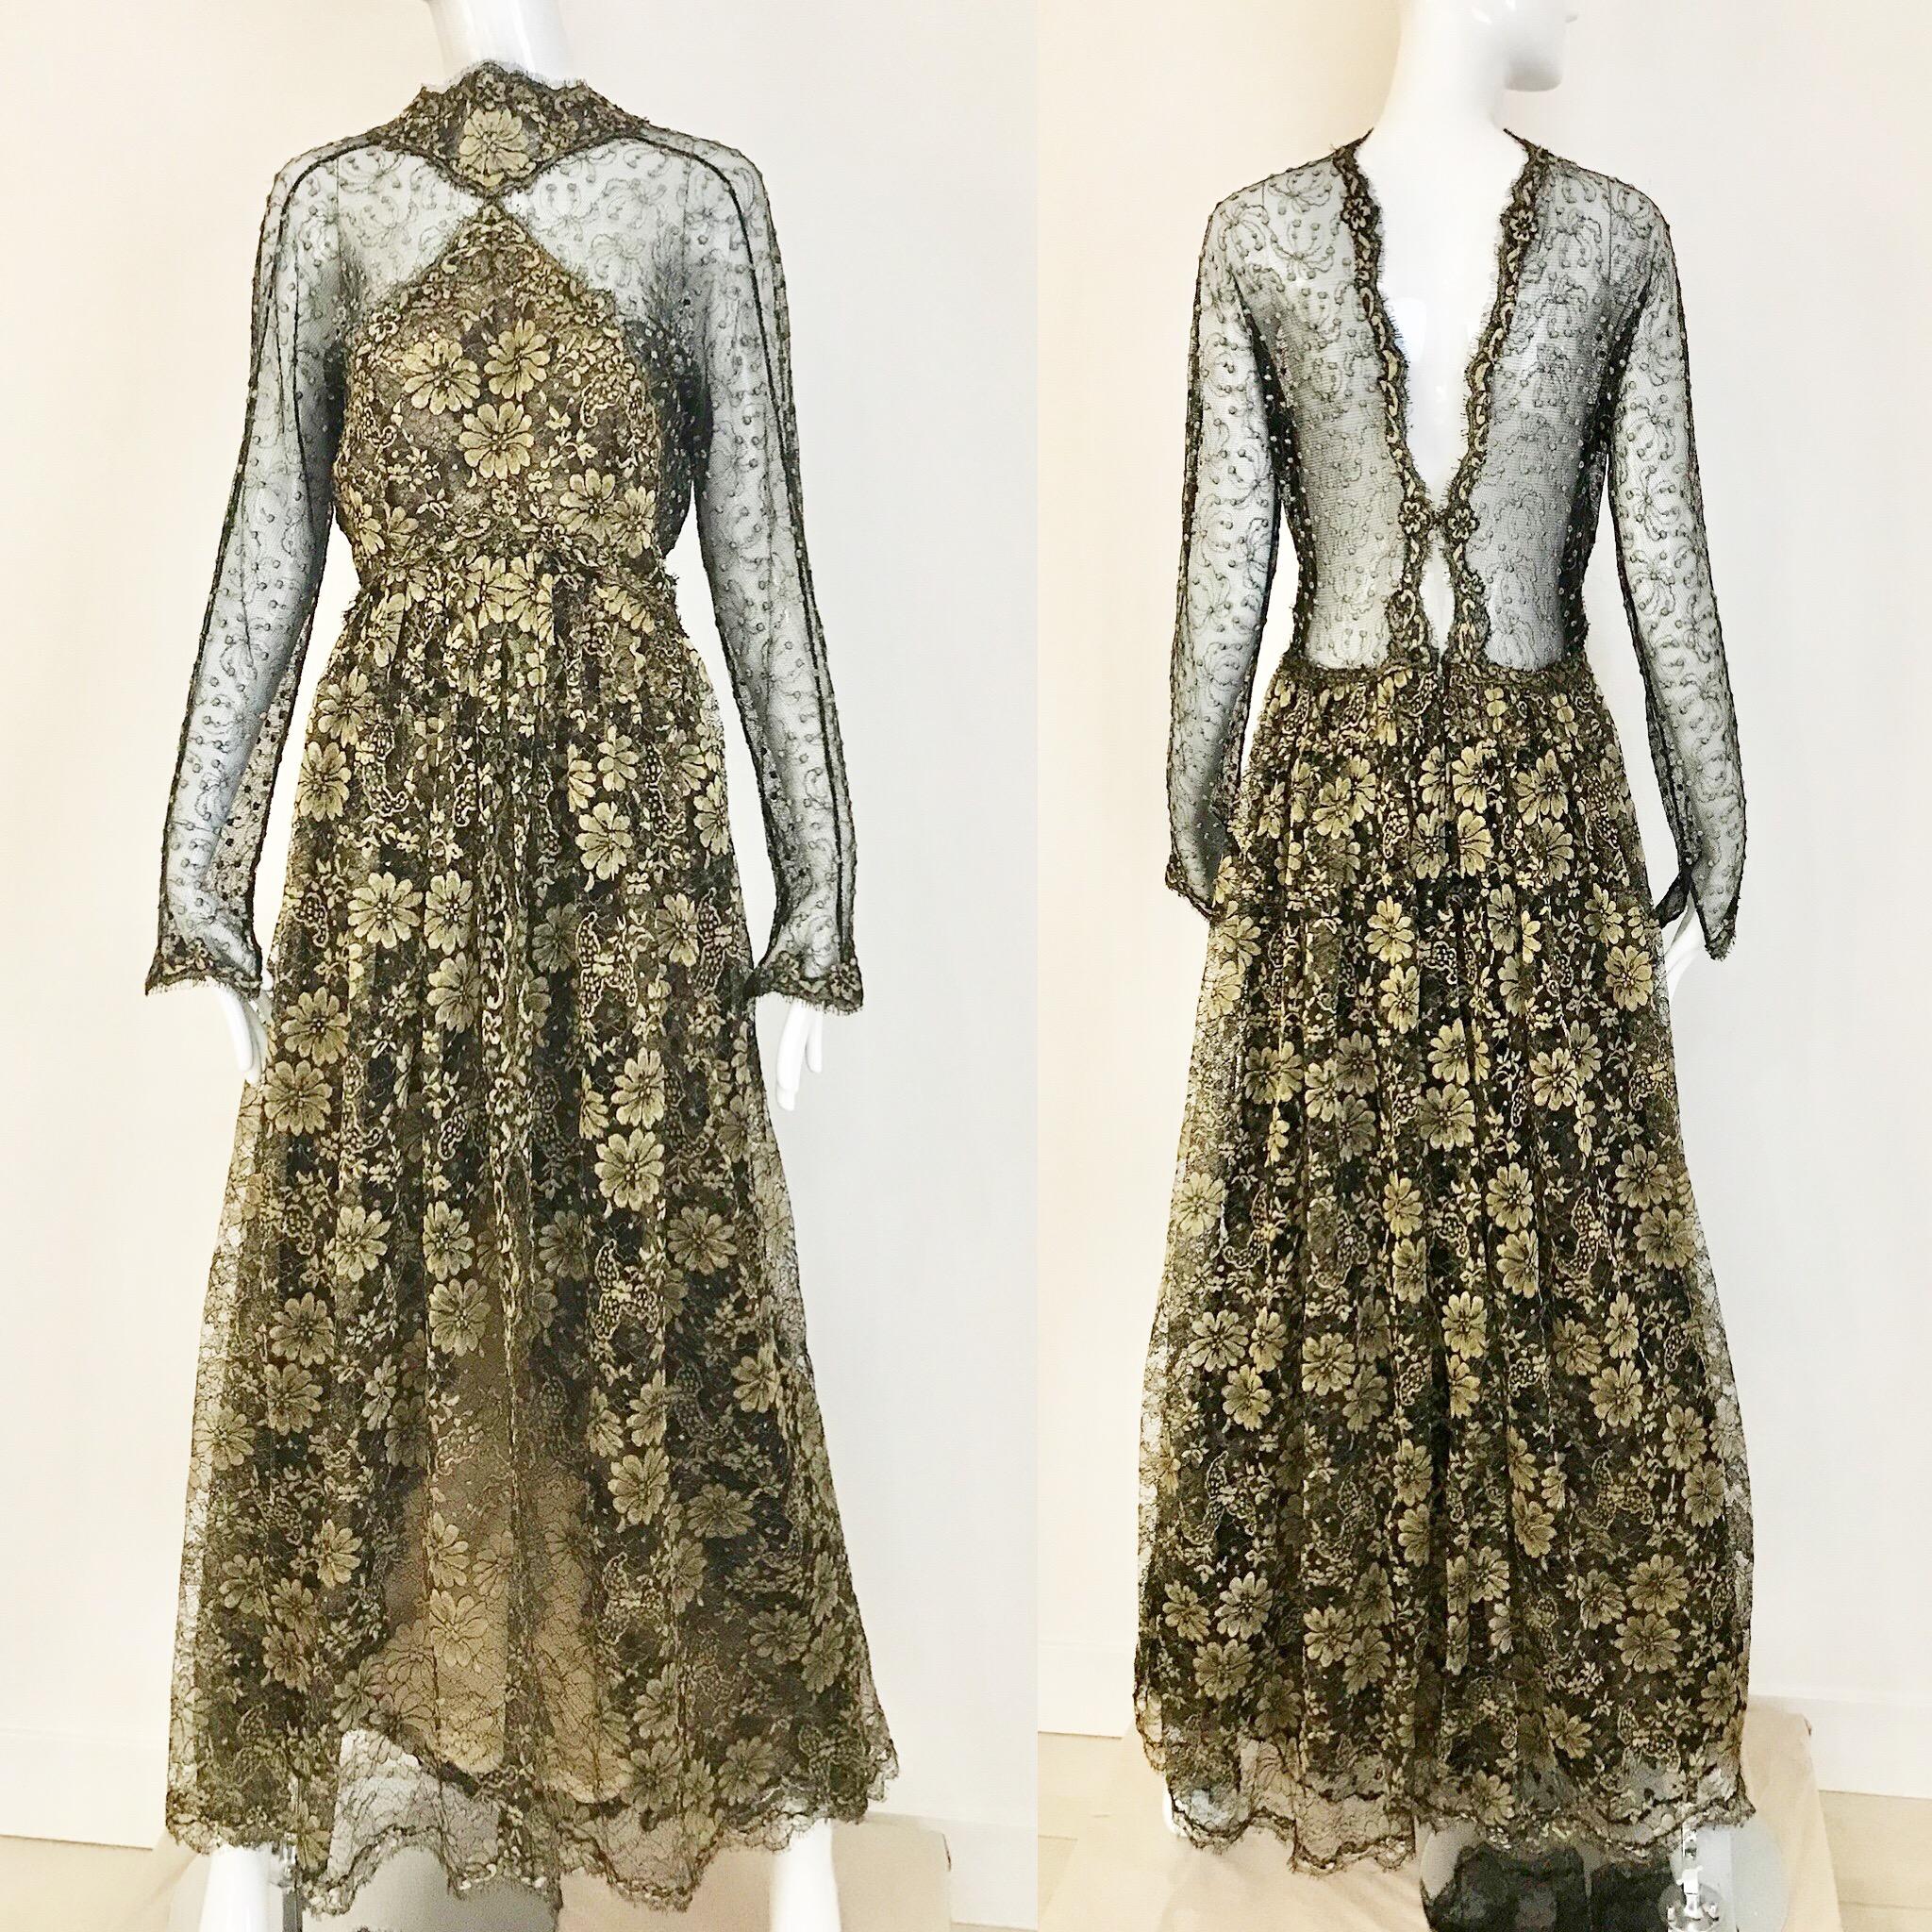 Early 90s Beautiful Geoffrey Beene gold brown long sleeve gown with exposed back.
Size: Small
Bust: 36 inches can fit 38 inches/ Waist: 26 inches/ Hip: 38 inches/ Dress Length: 61 inches/
Sleeve length: 25 inches
